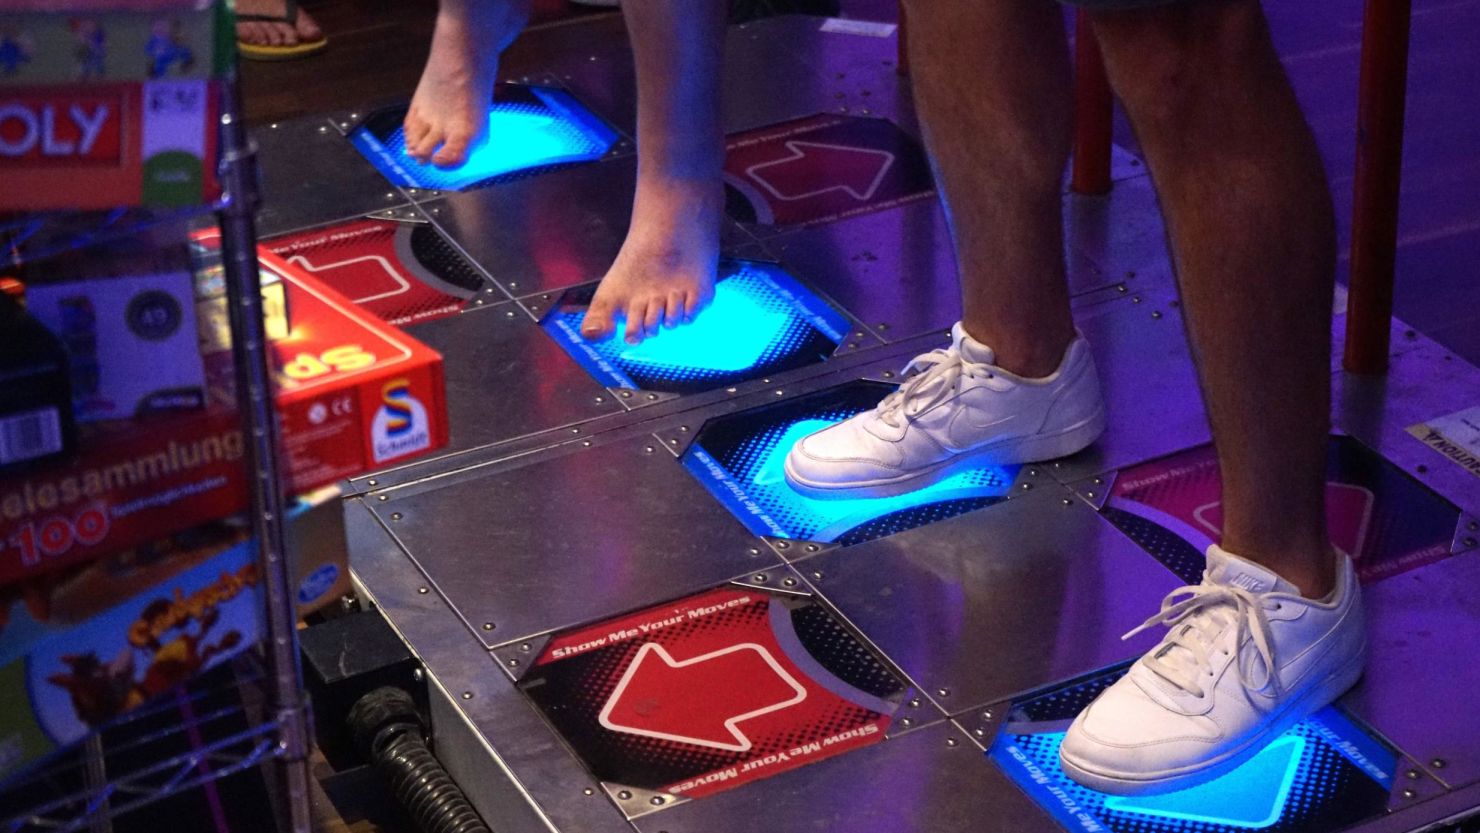 Visitors at the e-sport tournament "Homestory Cup" get ready to move by playing "Dance Dance Revolution" in Krefeld, Germany, on June 29, 2019.